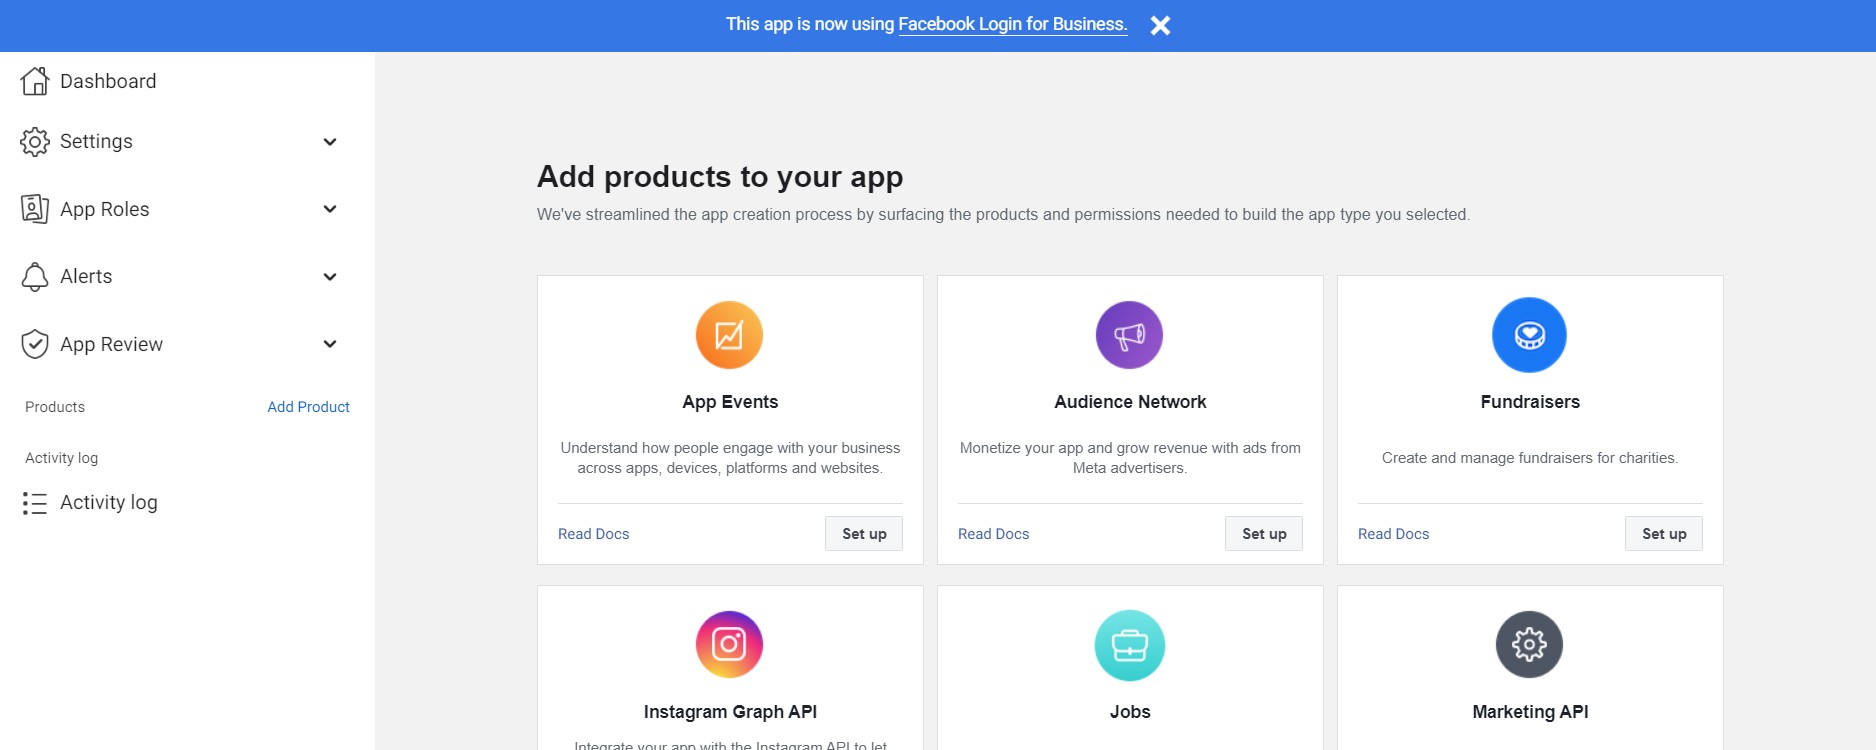 add-products-to-your-app